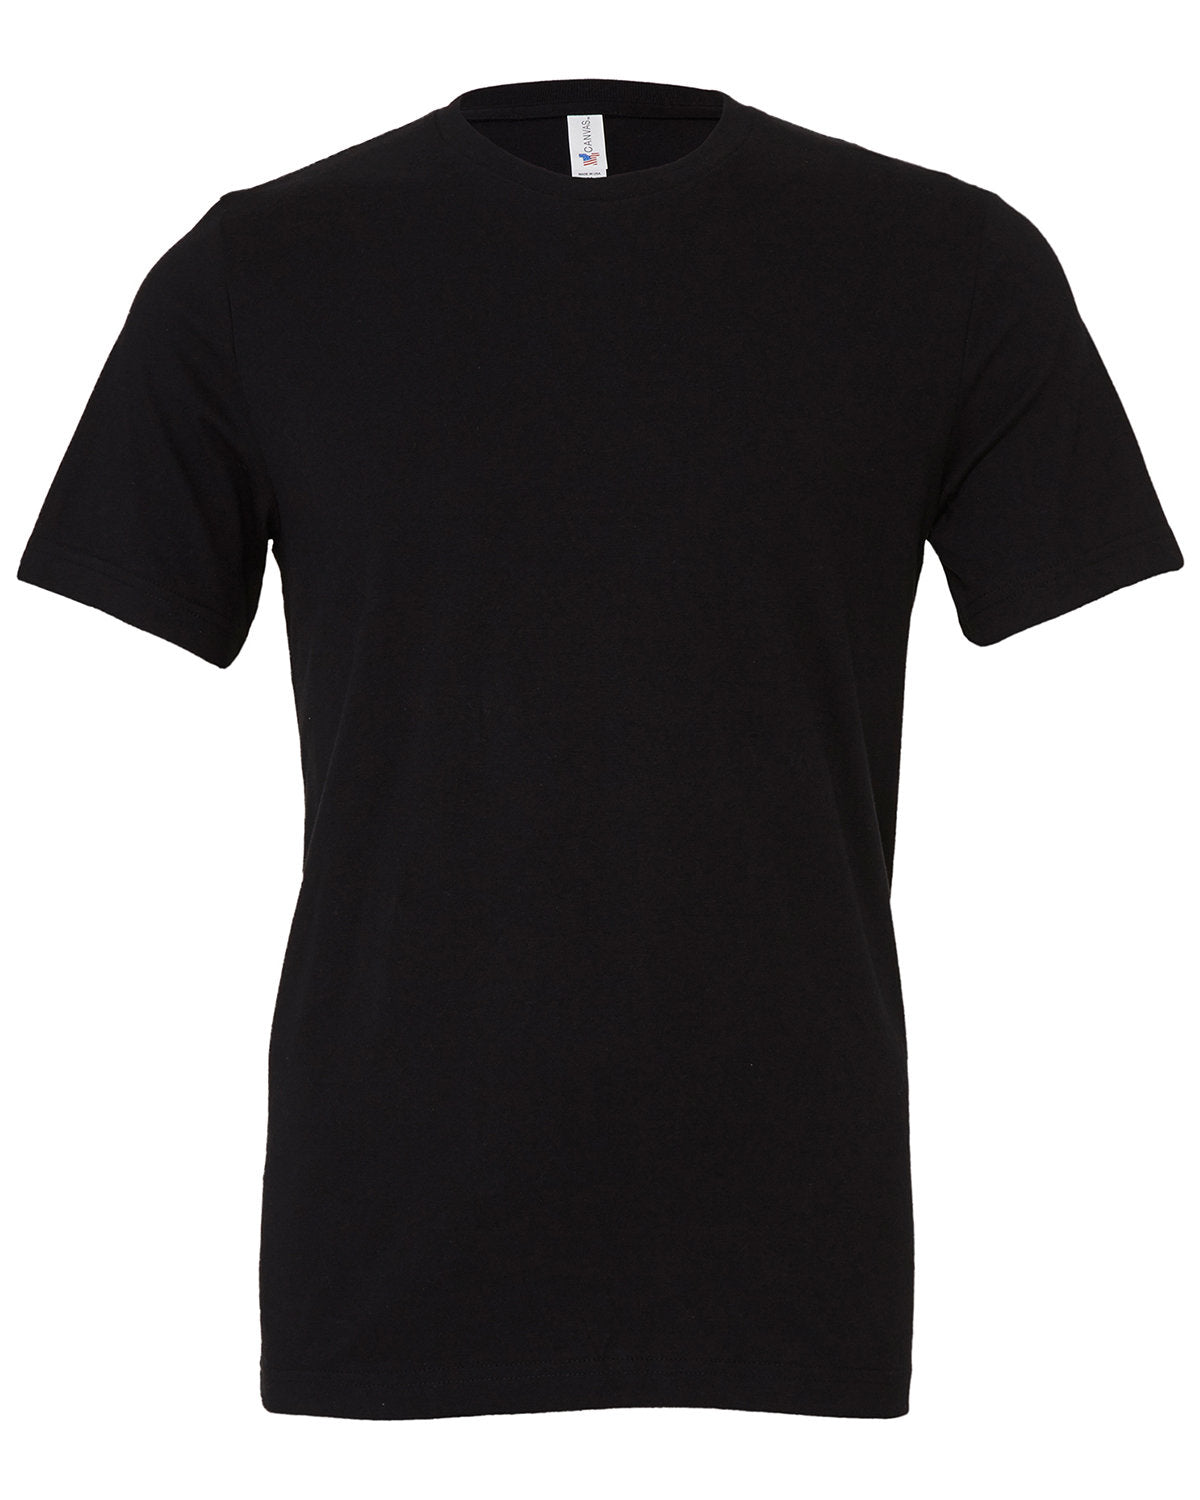 Bella Canvas black t-shirt displayed on a white background, featuring custom embroidery, a round neck, and short sleeves by Show Off Your Threads.